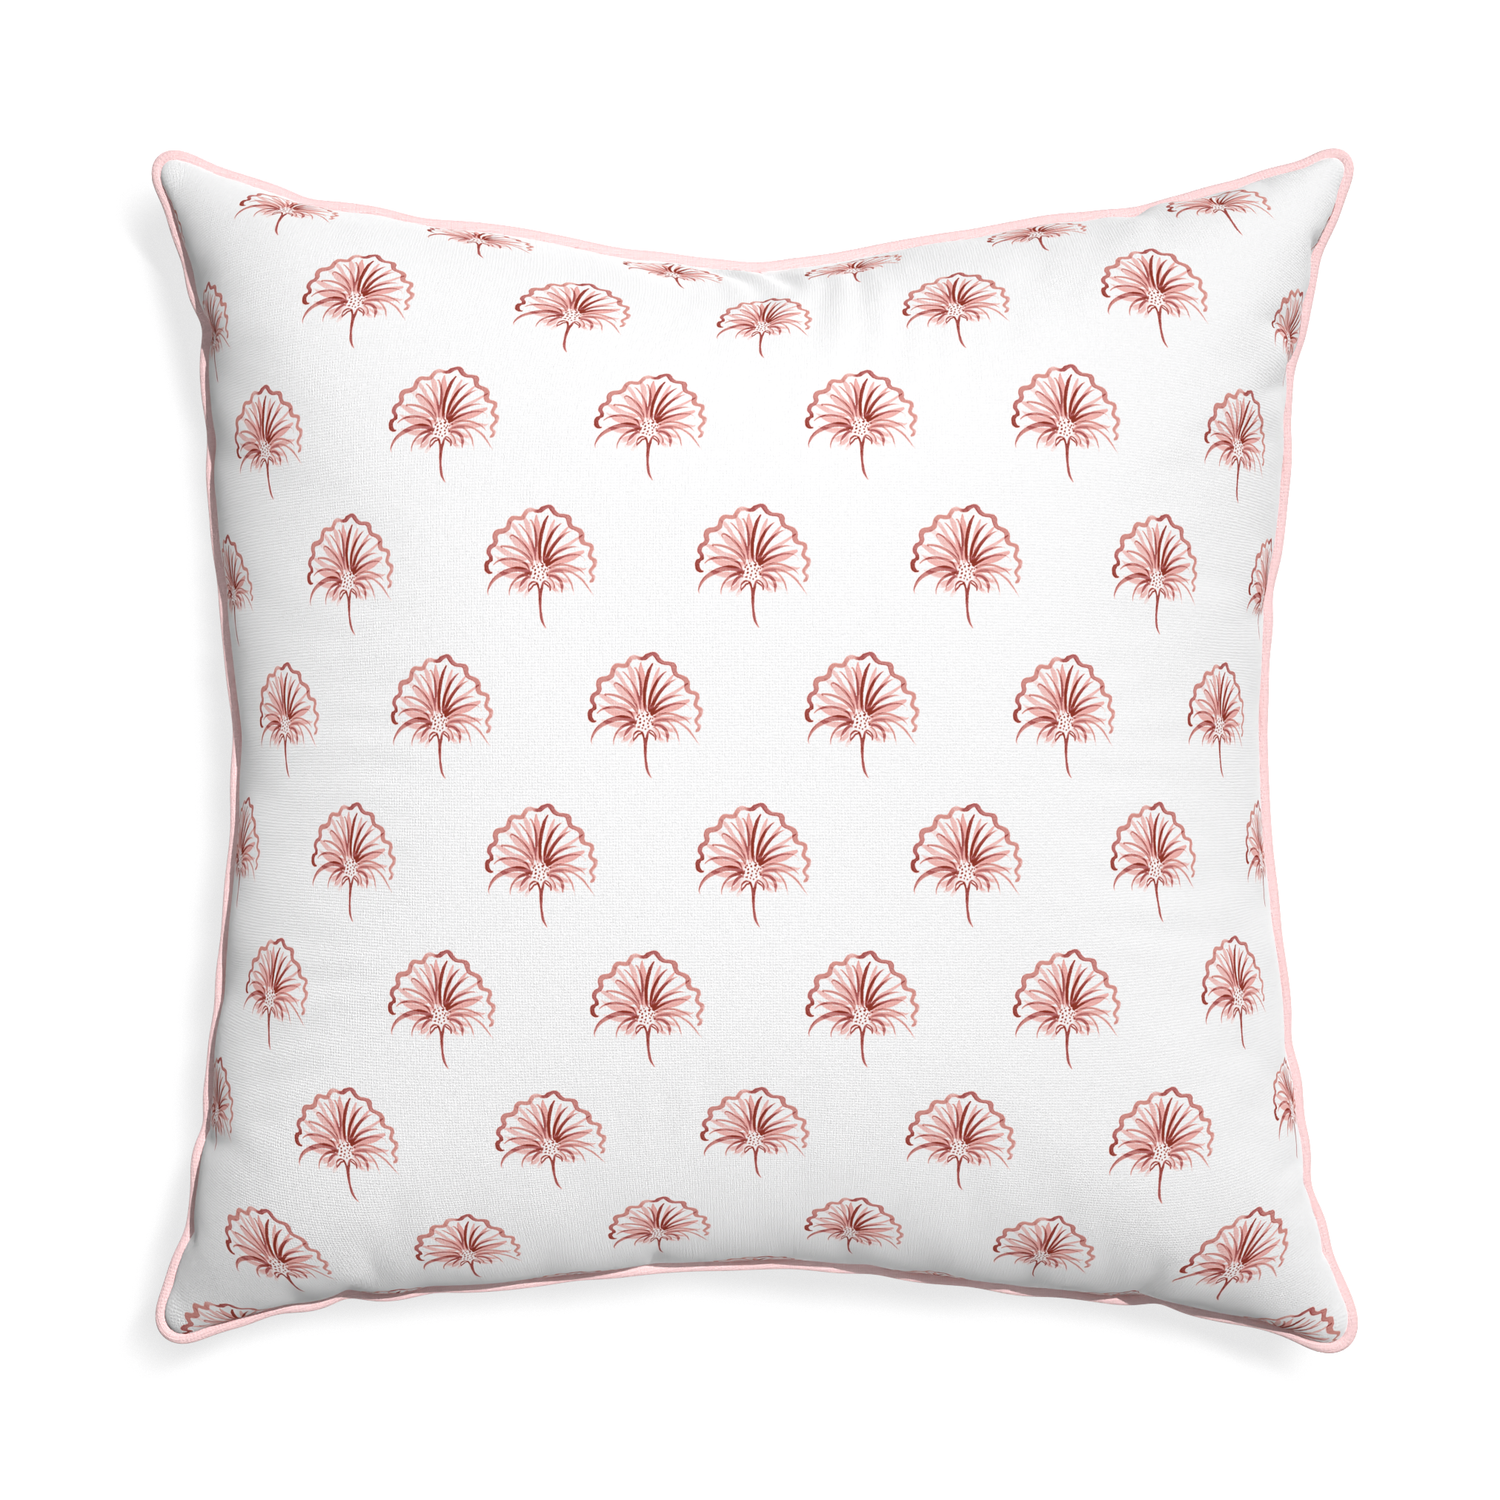 Euro-sham penelope rose custom floral pinkpillow with petal piping on white background